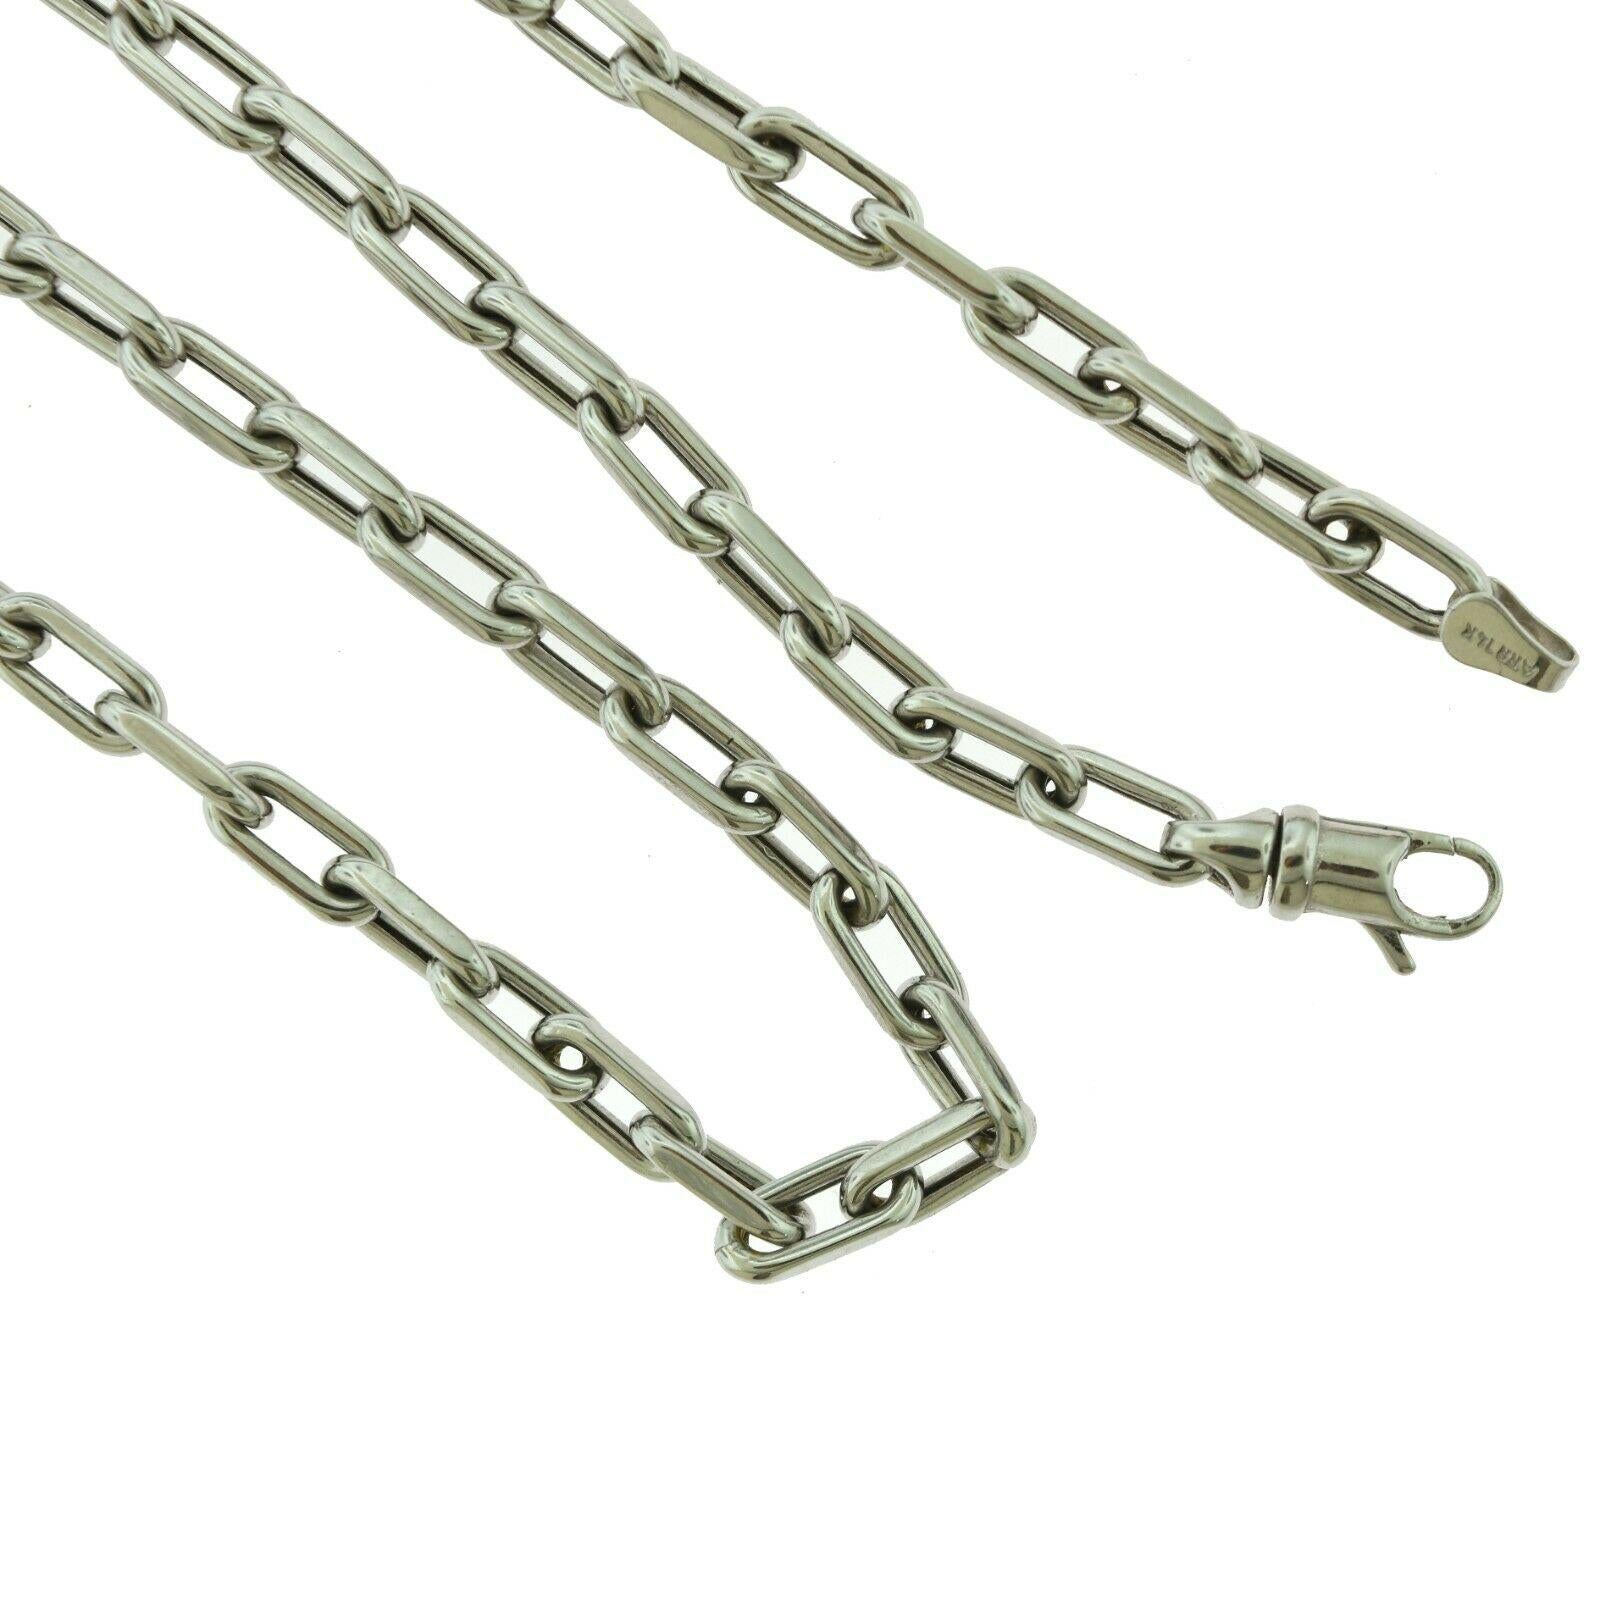 Brilliance Jewels, Miami
Questions? Call Us Anytime!
786,482,8100

Style: Chain Link Necklace

Metal: White Gold

Metal Purity: 14k​​​​​​​

Total Item Weight (grams): 17.2g

Necklace Length: Approx. 30 inches

Closure: Lobster Clasp

Hallmark: 14K;